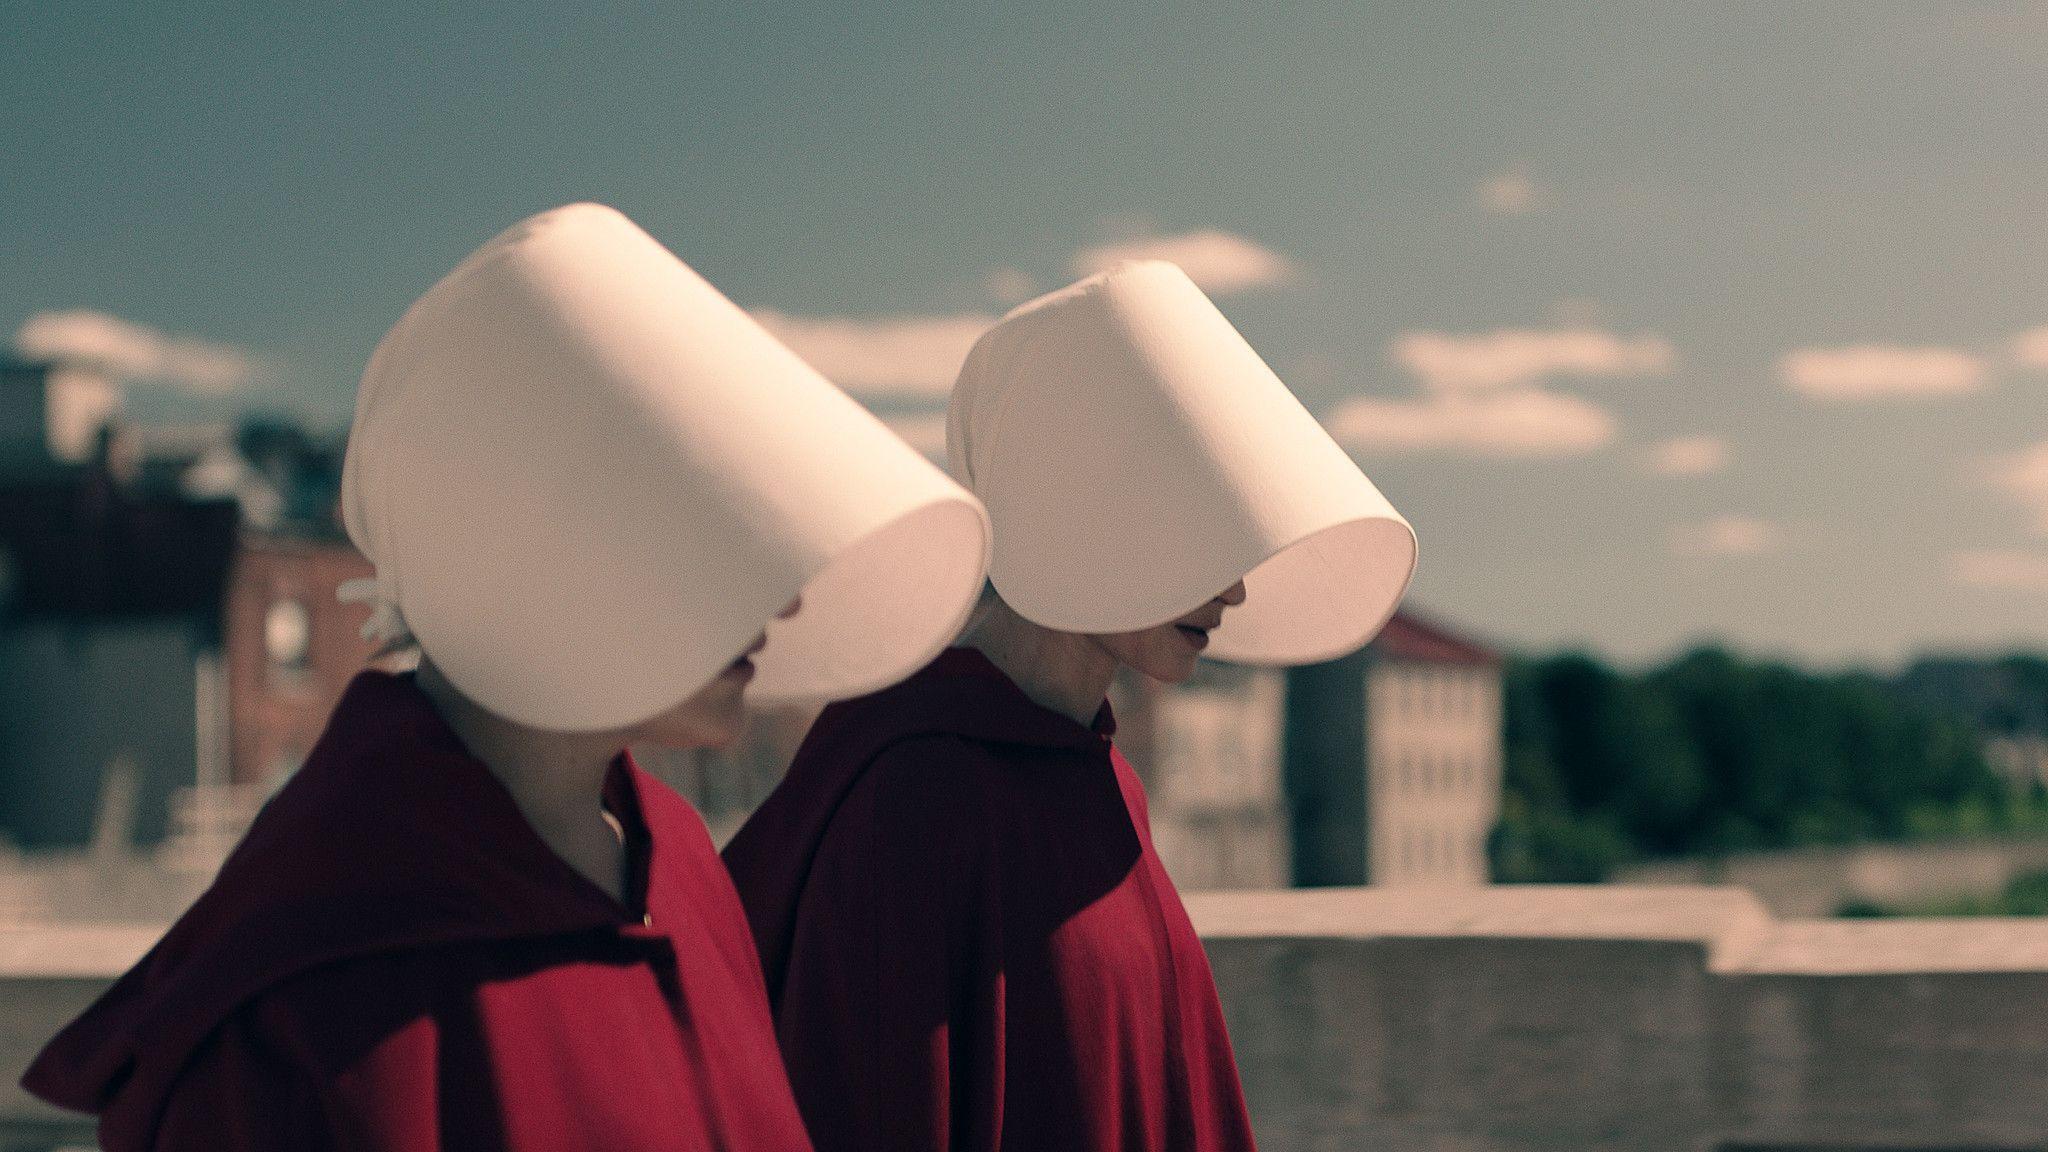 Meet the women who brought the misogynist world of 'The Handmaid's